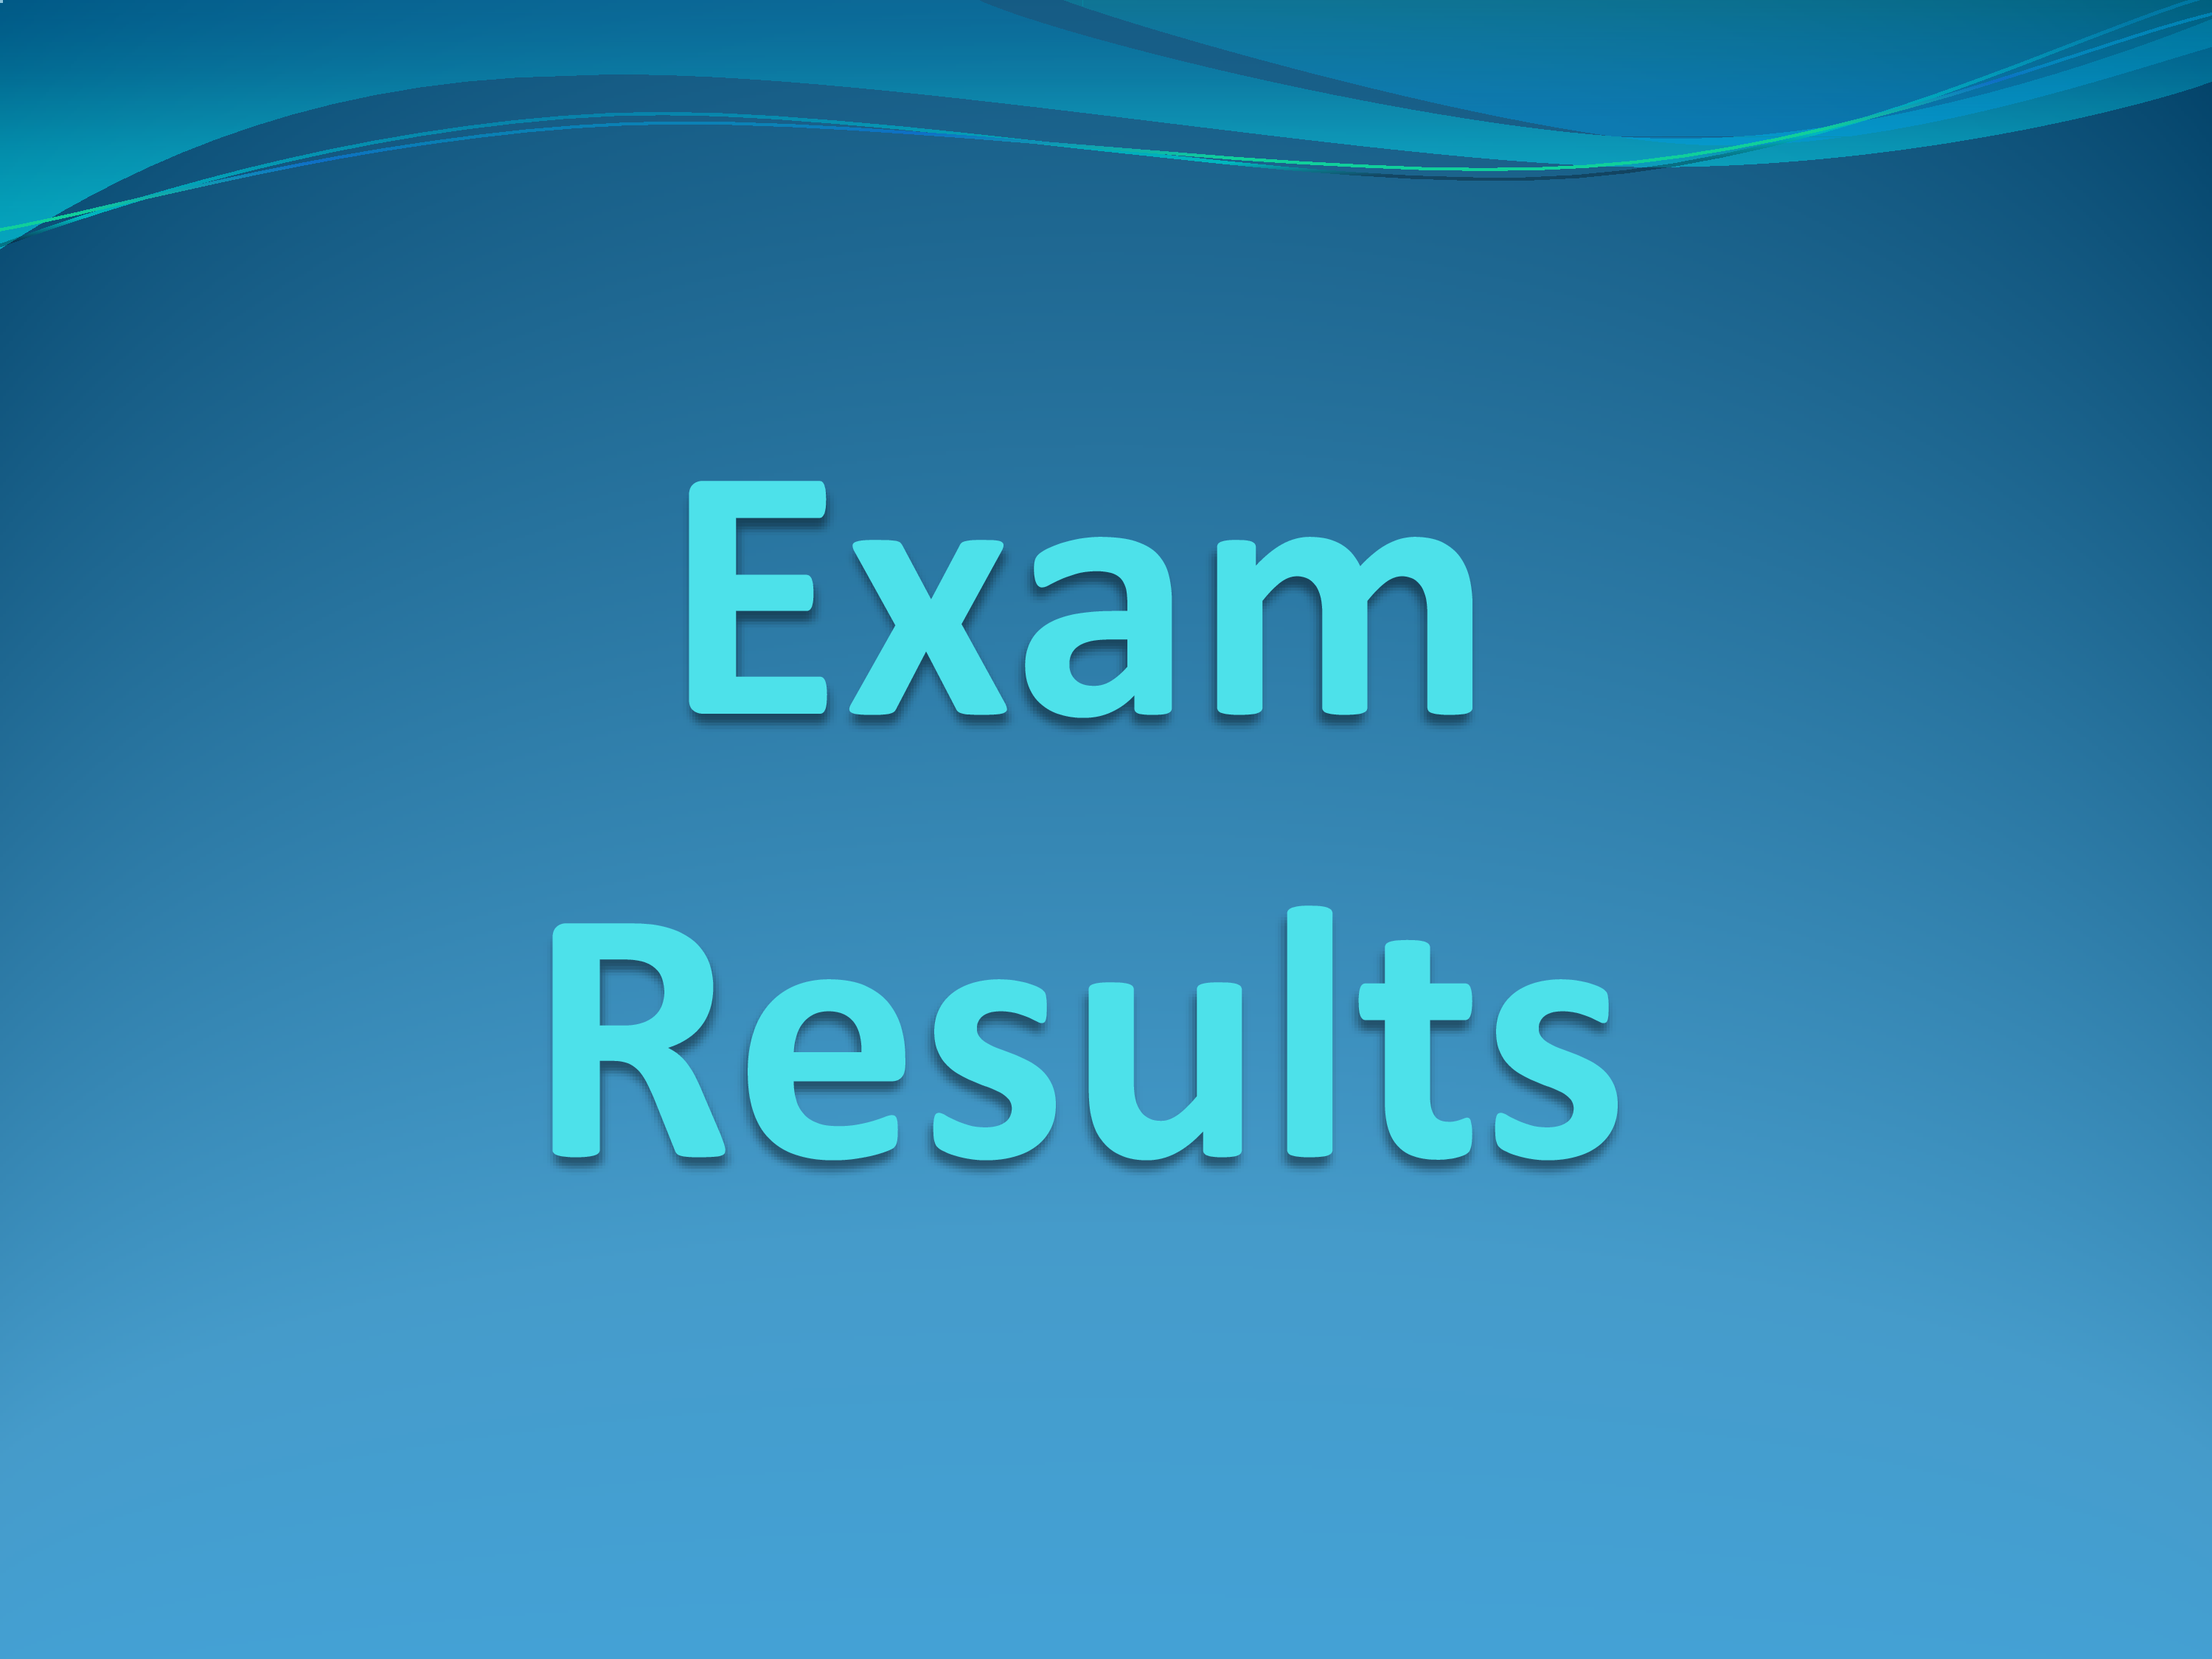 Exam Results grapic